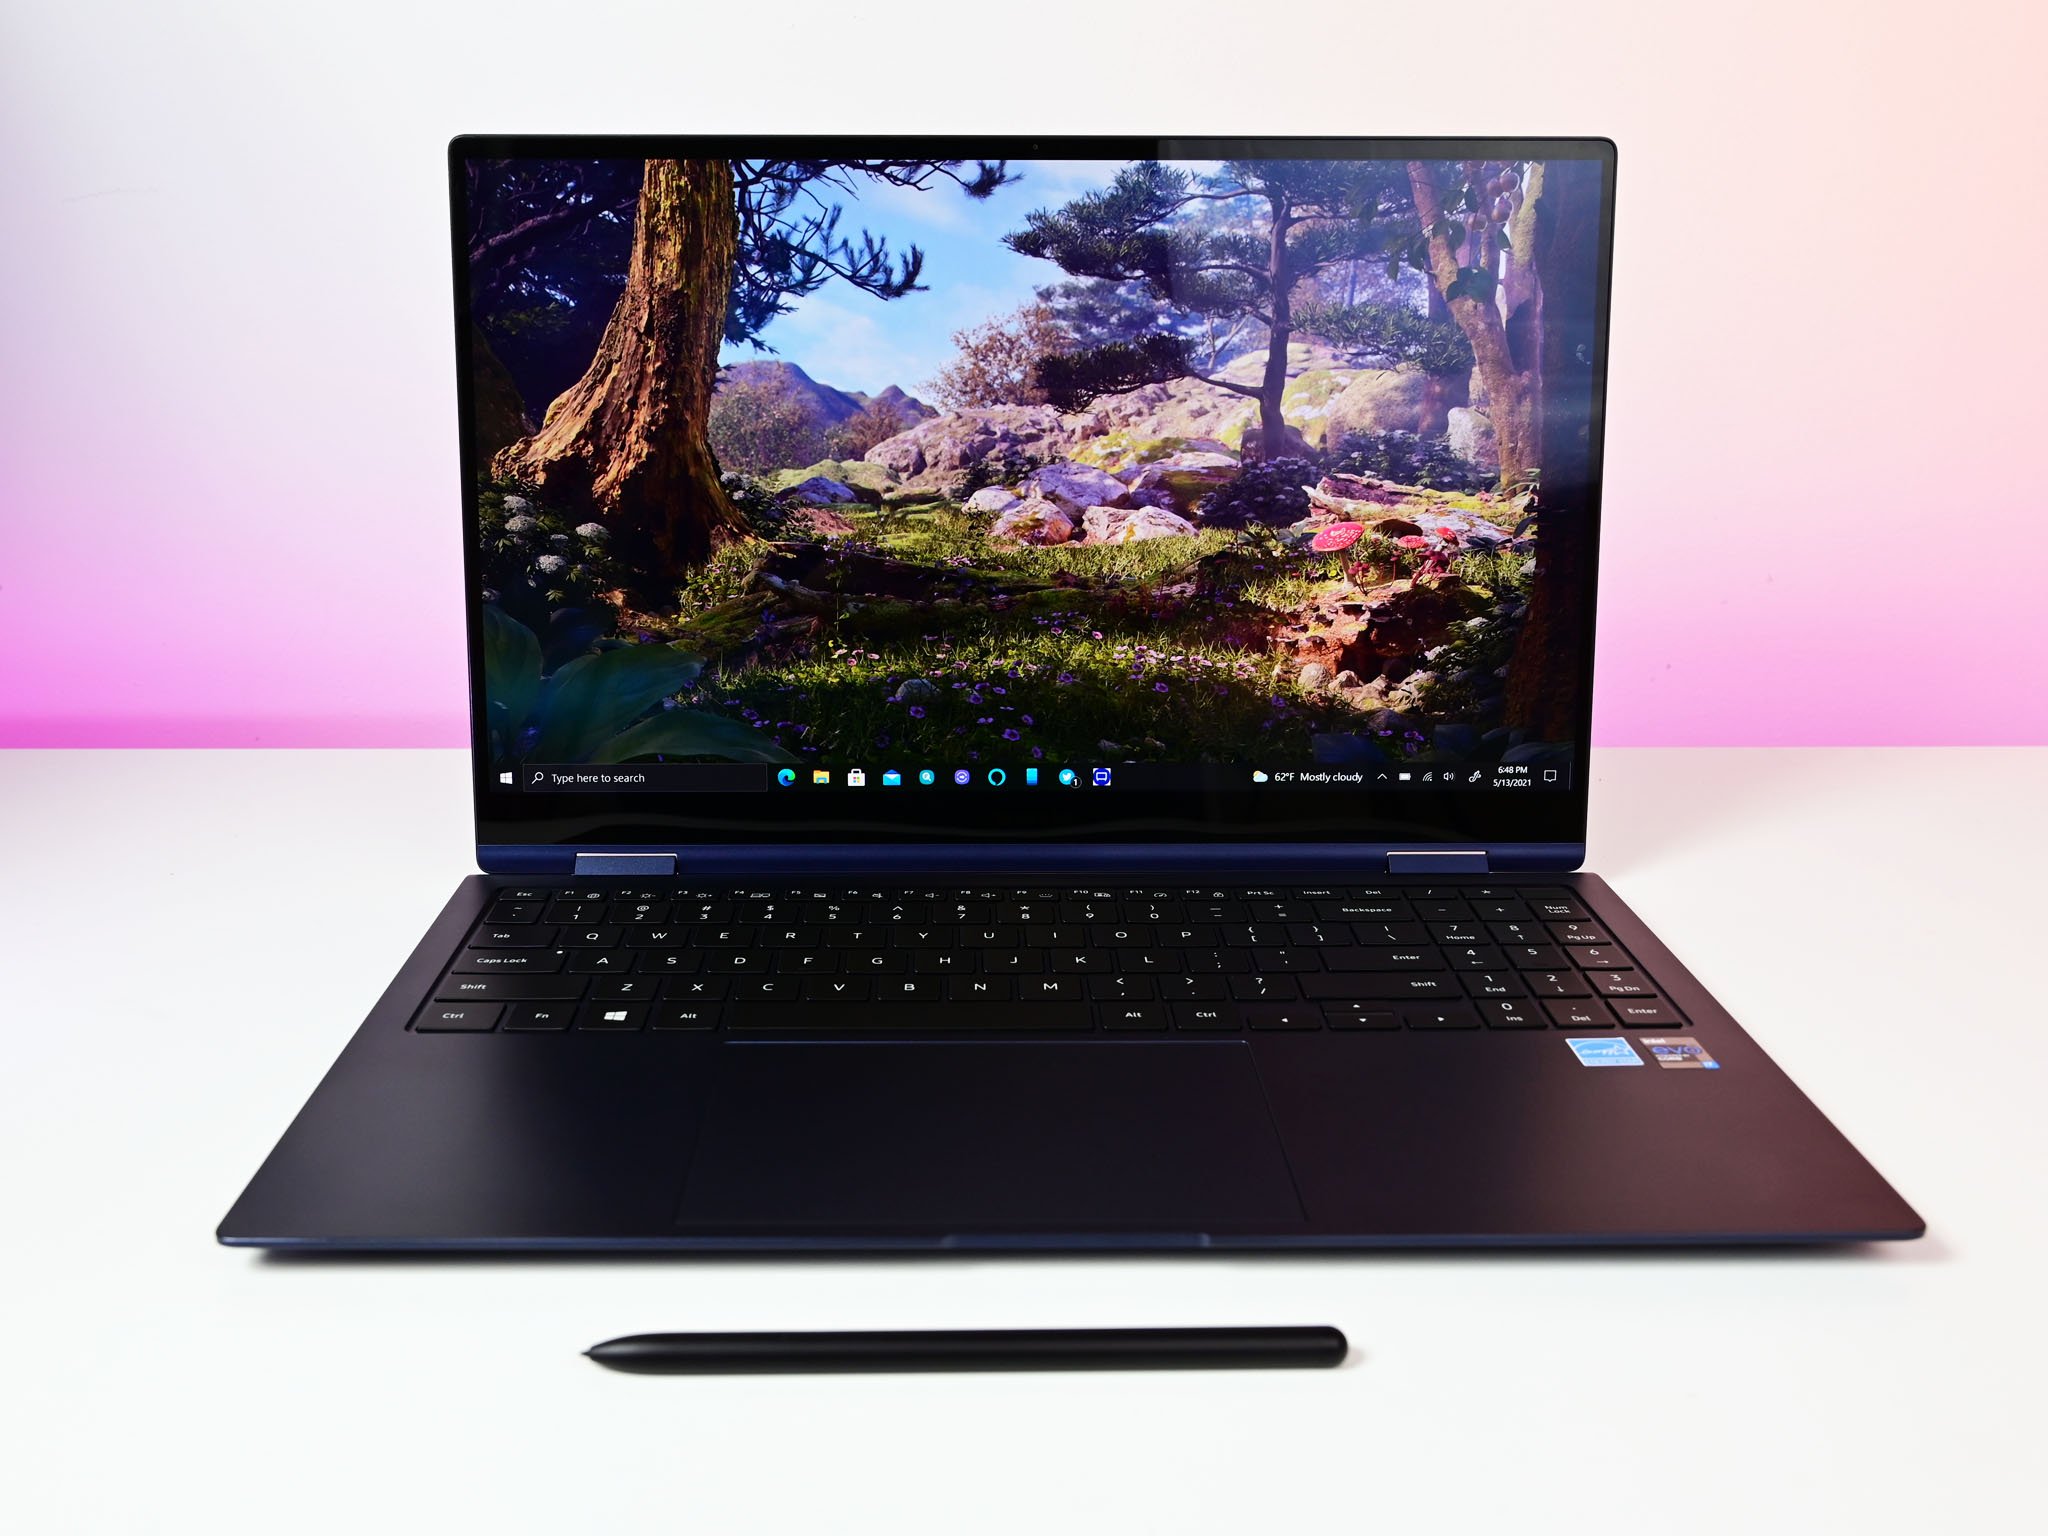 Samsung Galaxy Book Pro 360 review: A unique take on a 15-inch 